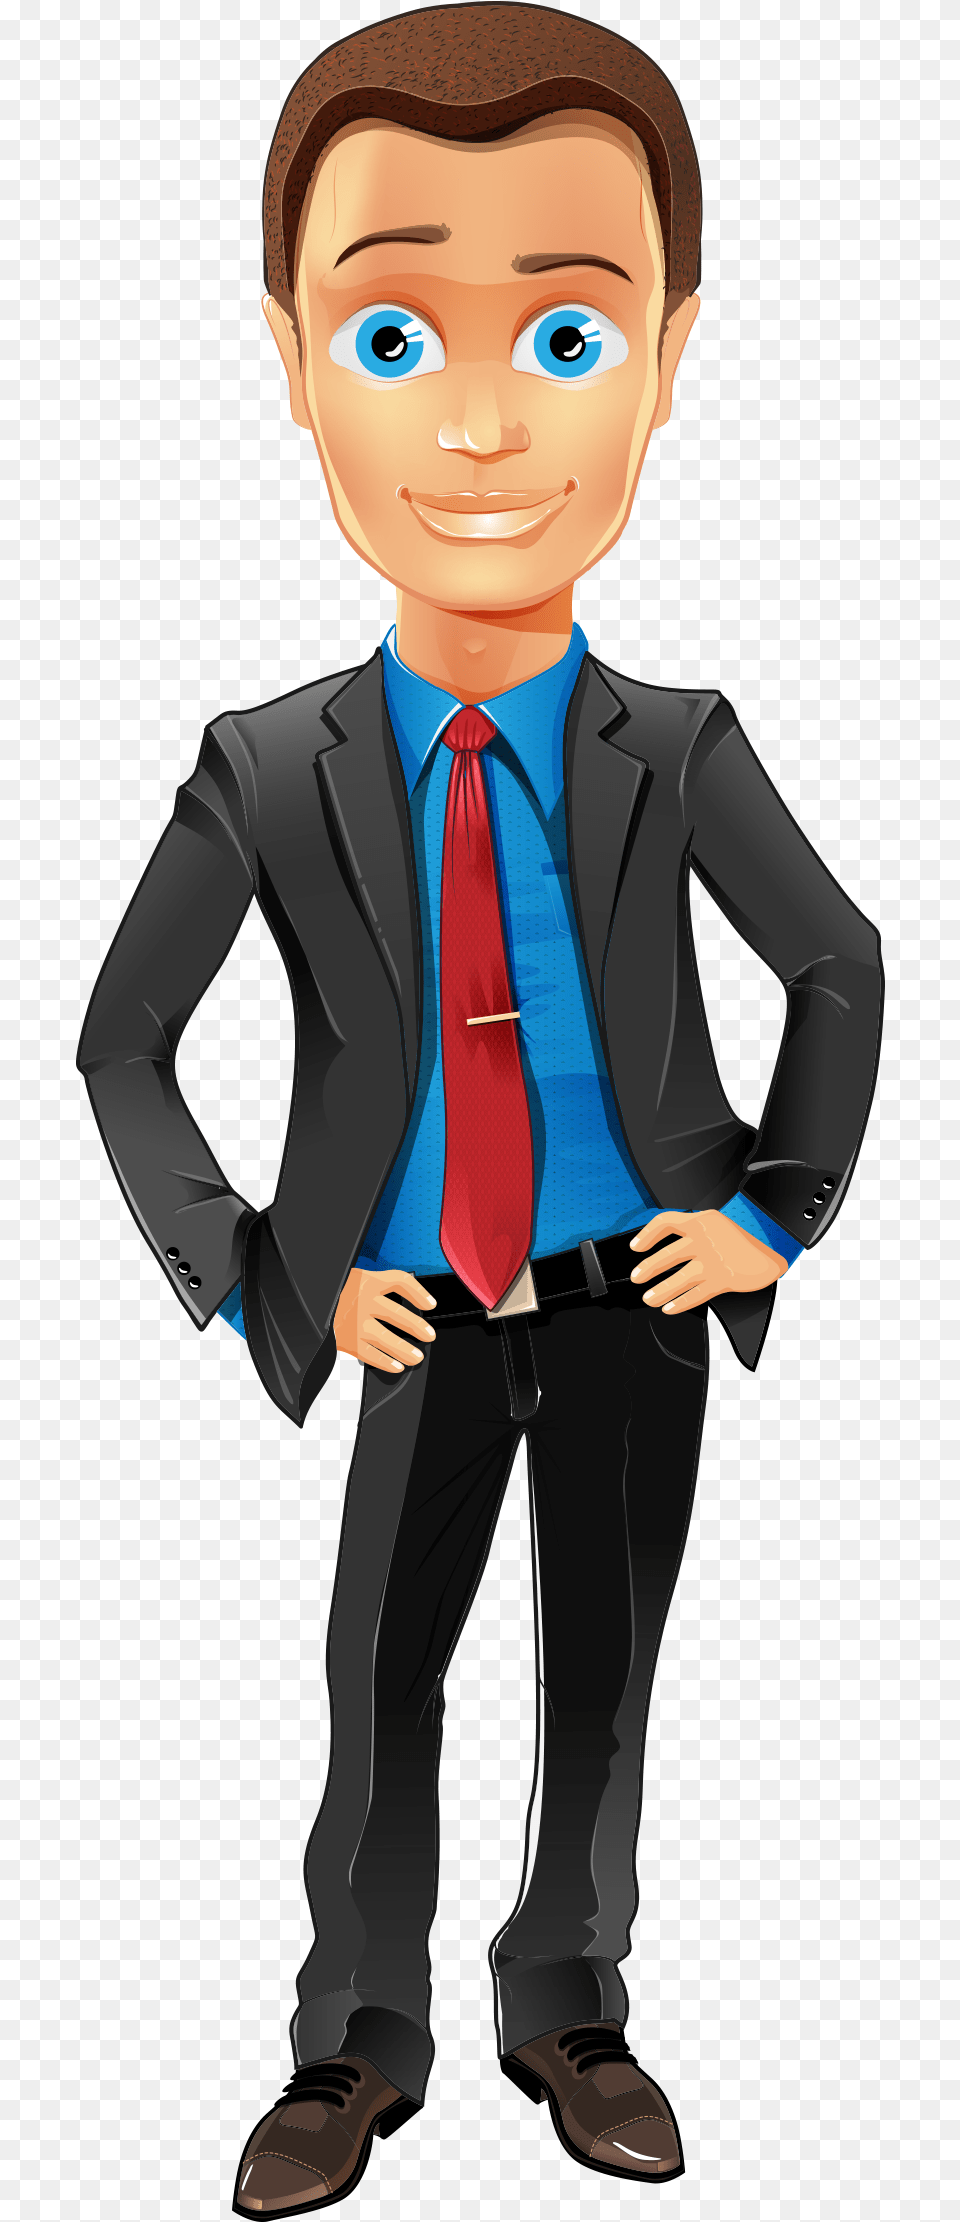 Business Man Cartoon Character Illustration Transparent Background Cartoon Man, Accessories, Clothing, Formal Wear, Necktie Free Png